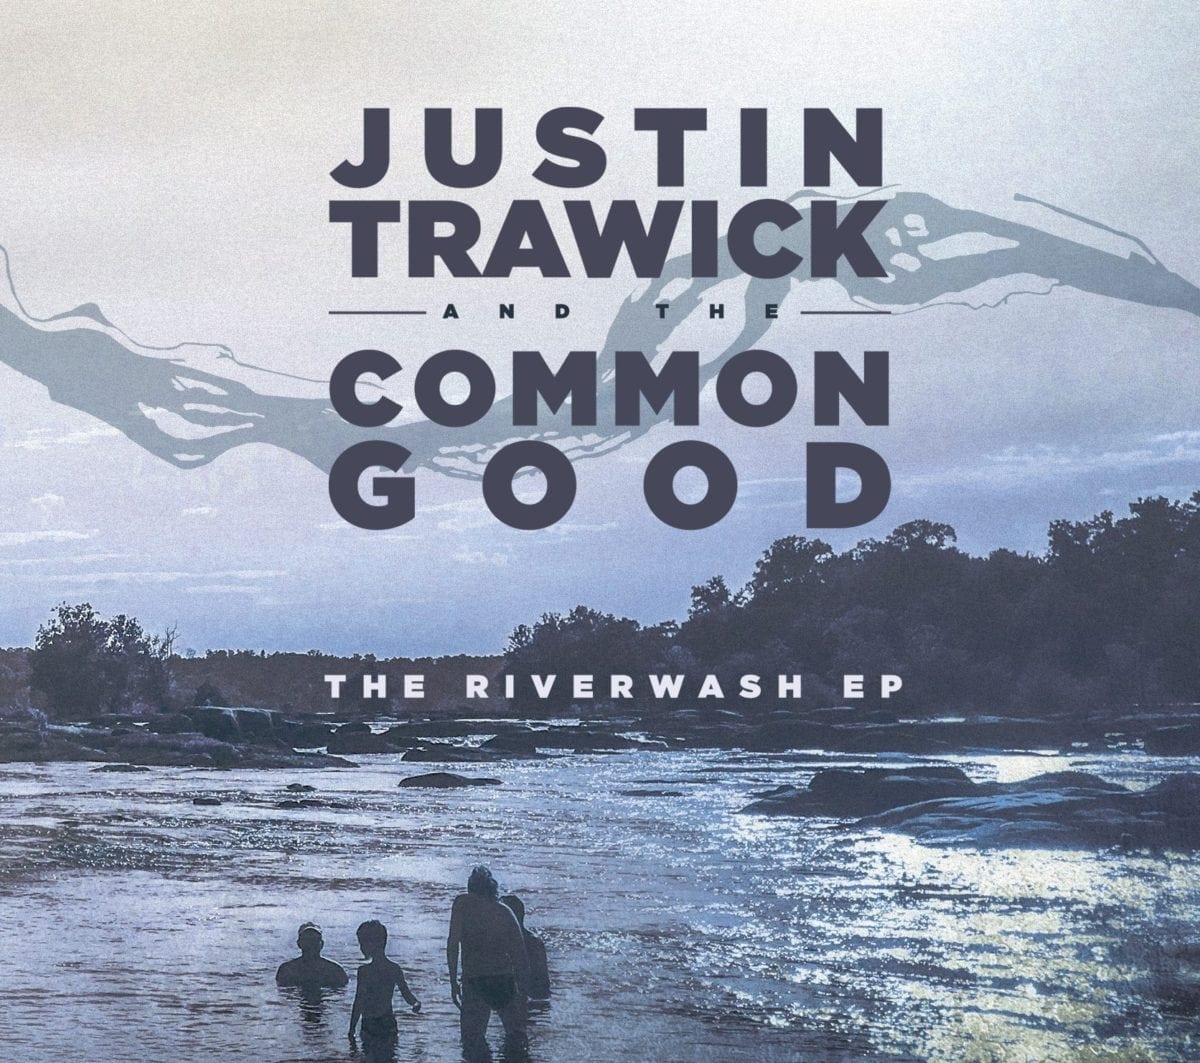 Justin Trawick and The Common Good